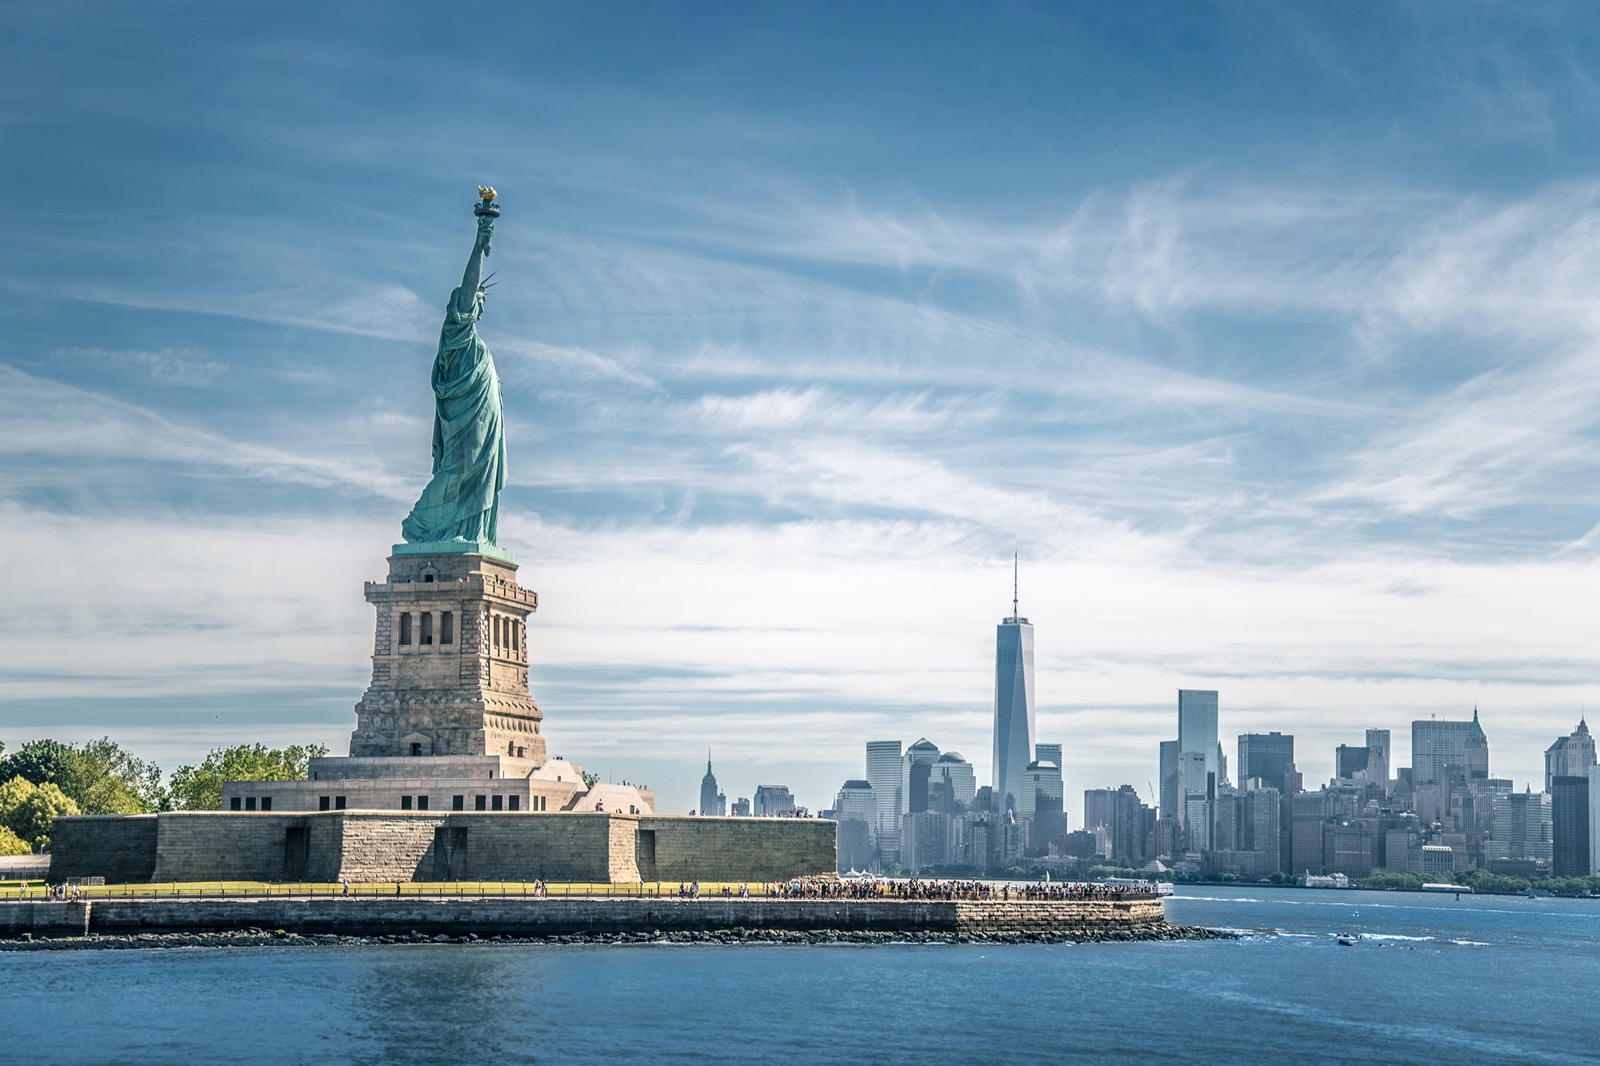 Only 34% Of Adults Can Pass This Random History Trivia Quiz New York Statue Of Liberty